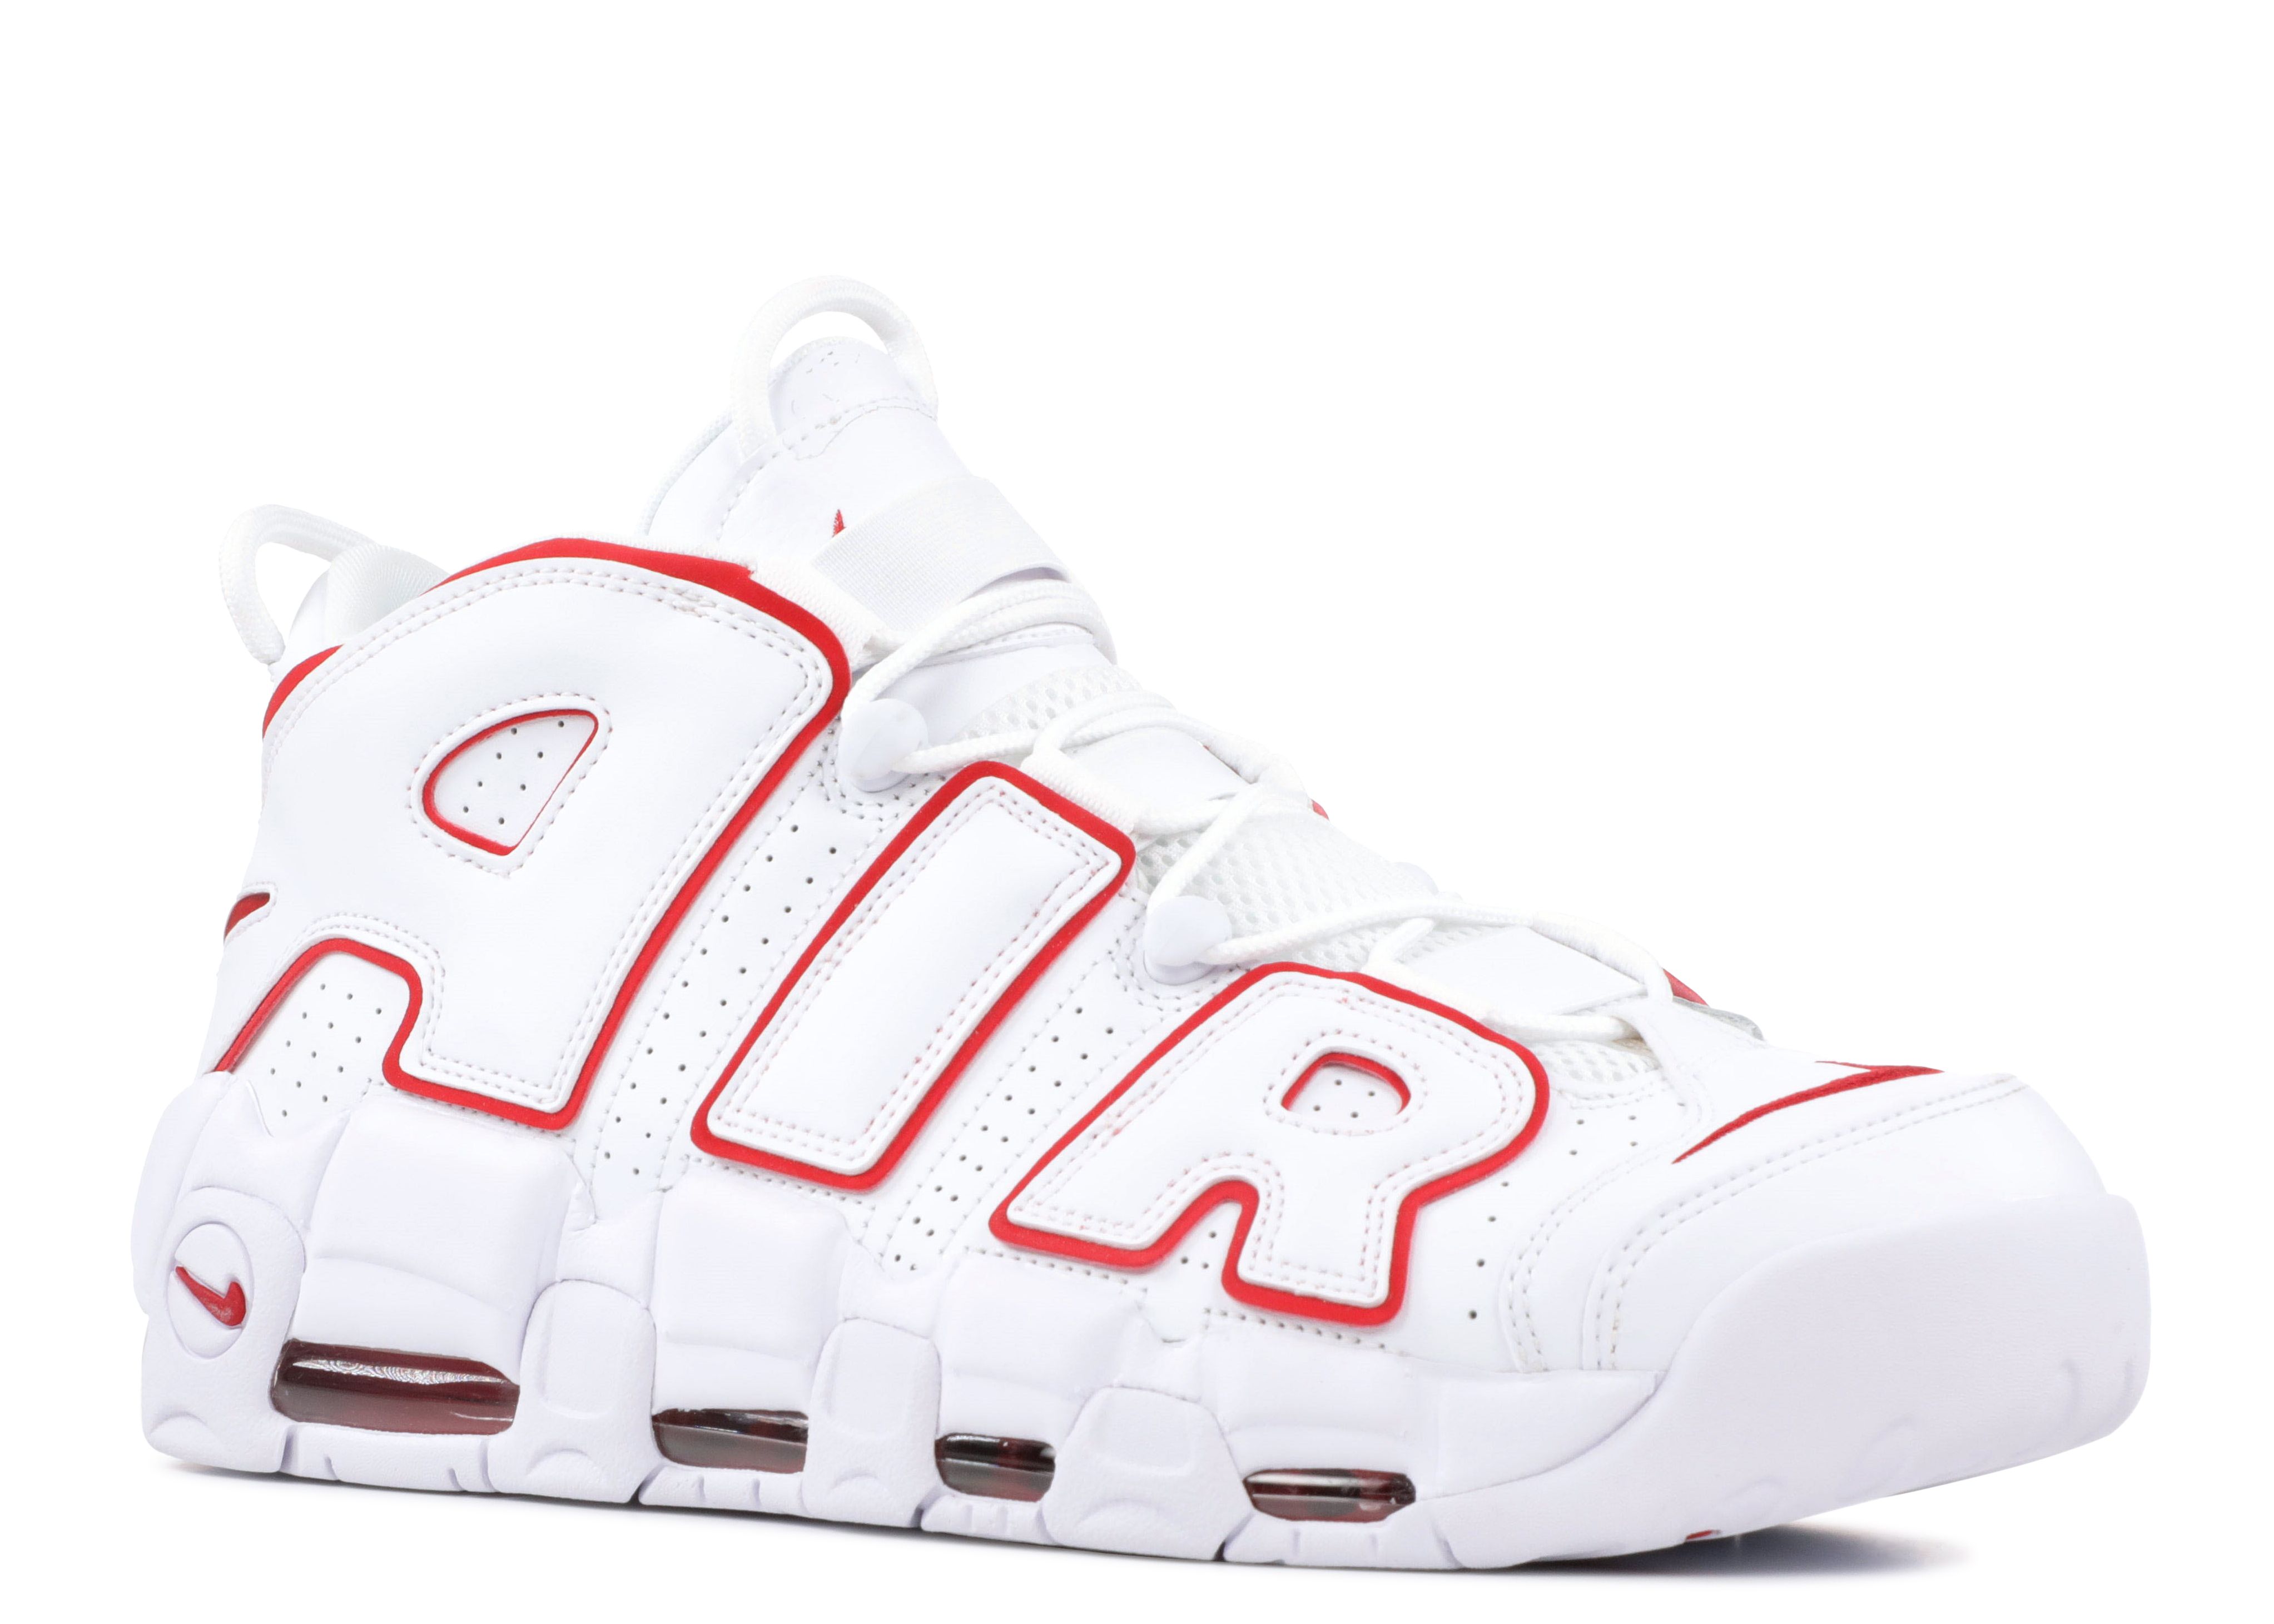 Nike air more uptempo red. Nike Air Uptempo White Red. Nike Air Uptempo 96. Nike Air more Uptempo 96 White. Nike Air more Uptempo.